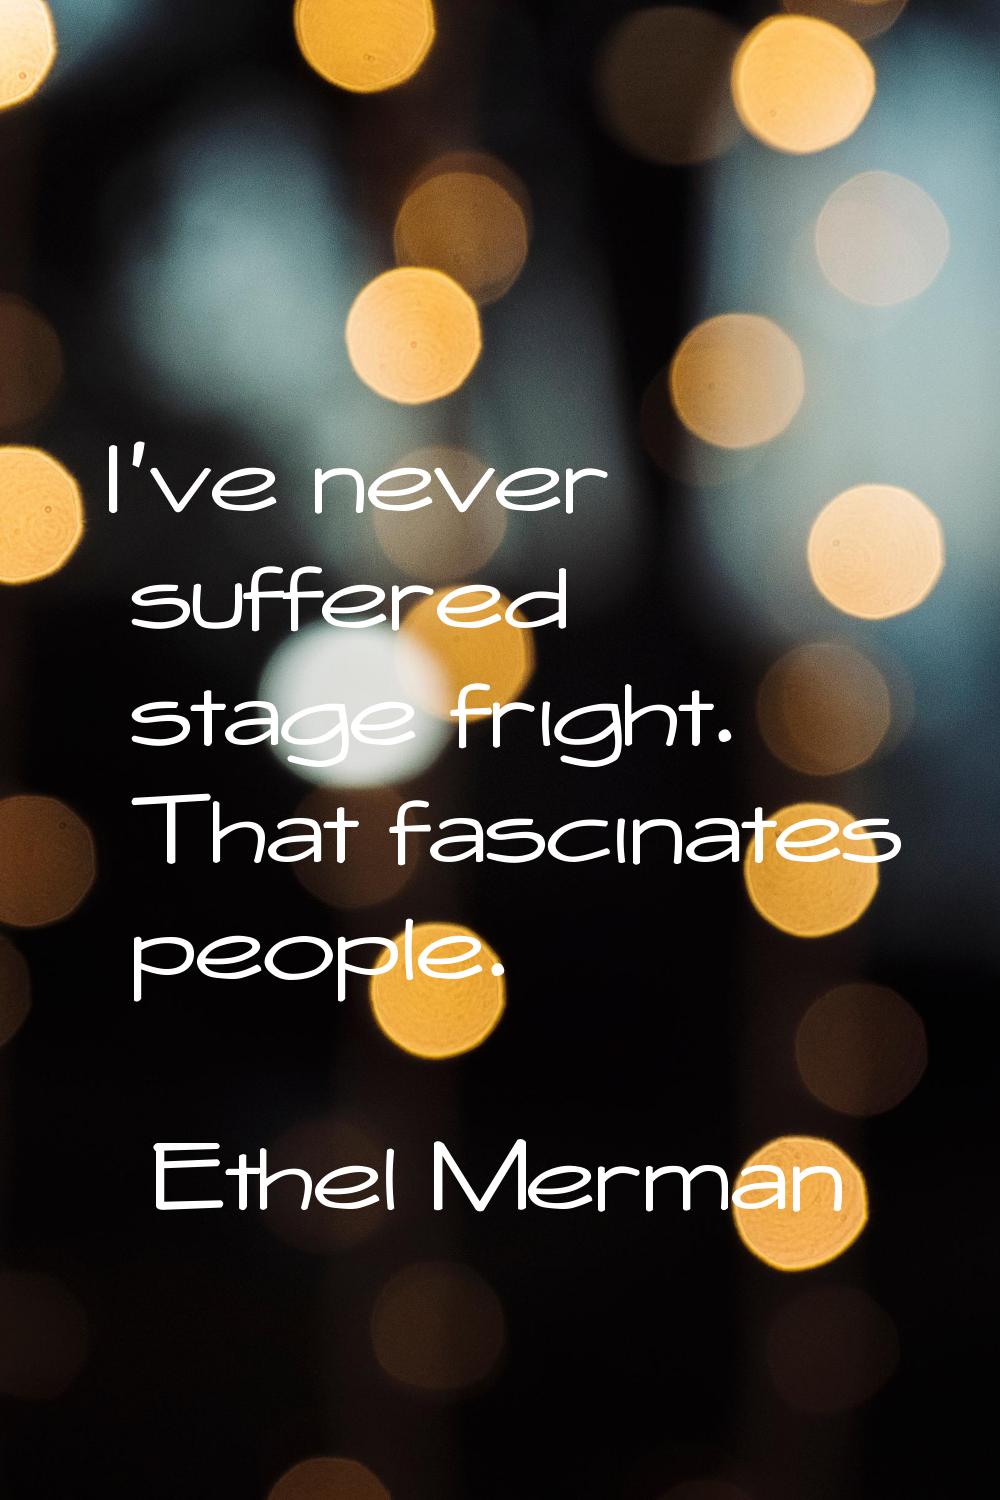 I've never suffered stage fright. That fascinates people.